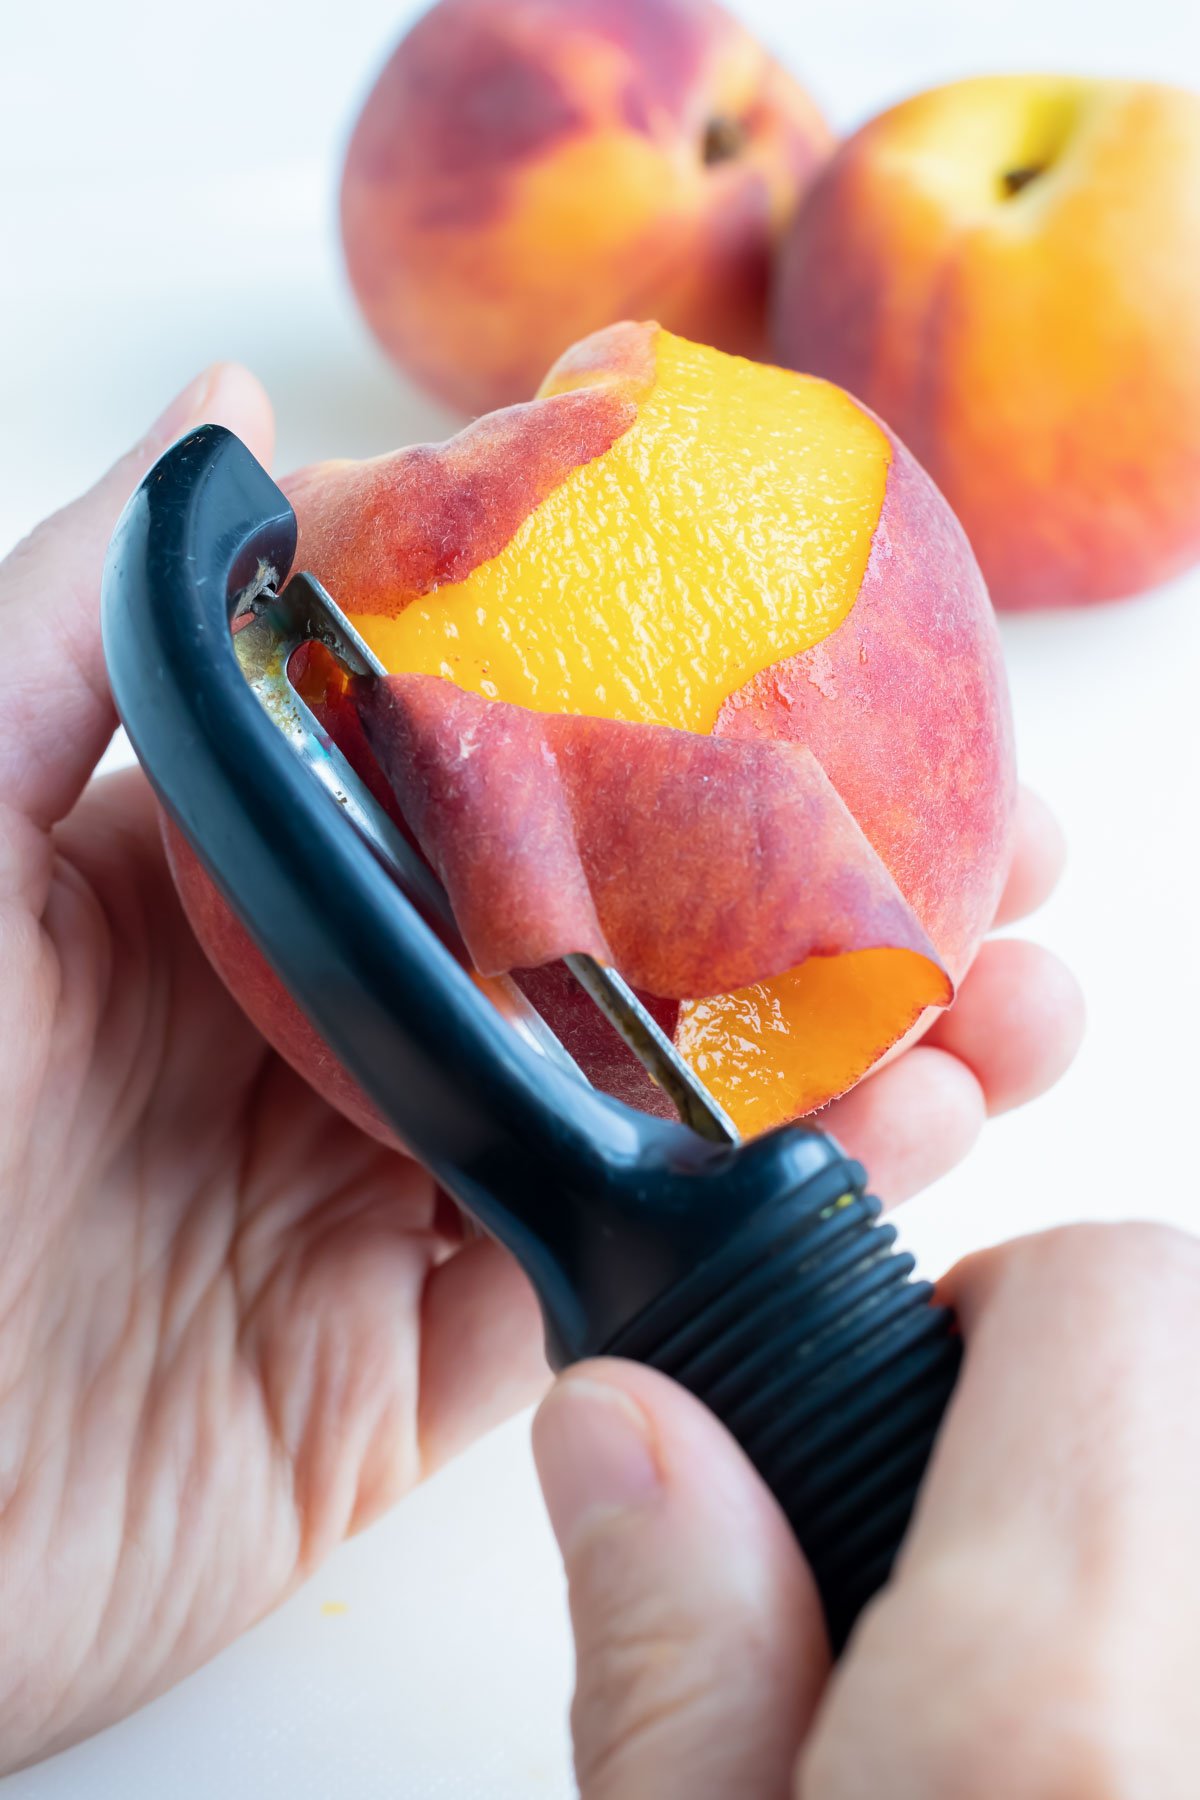 Peeling fruit with a vegetable peeler while two more peaches sit on the counter to be peeled.